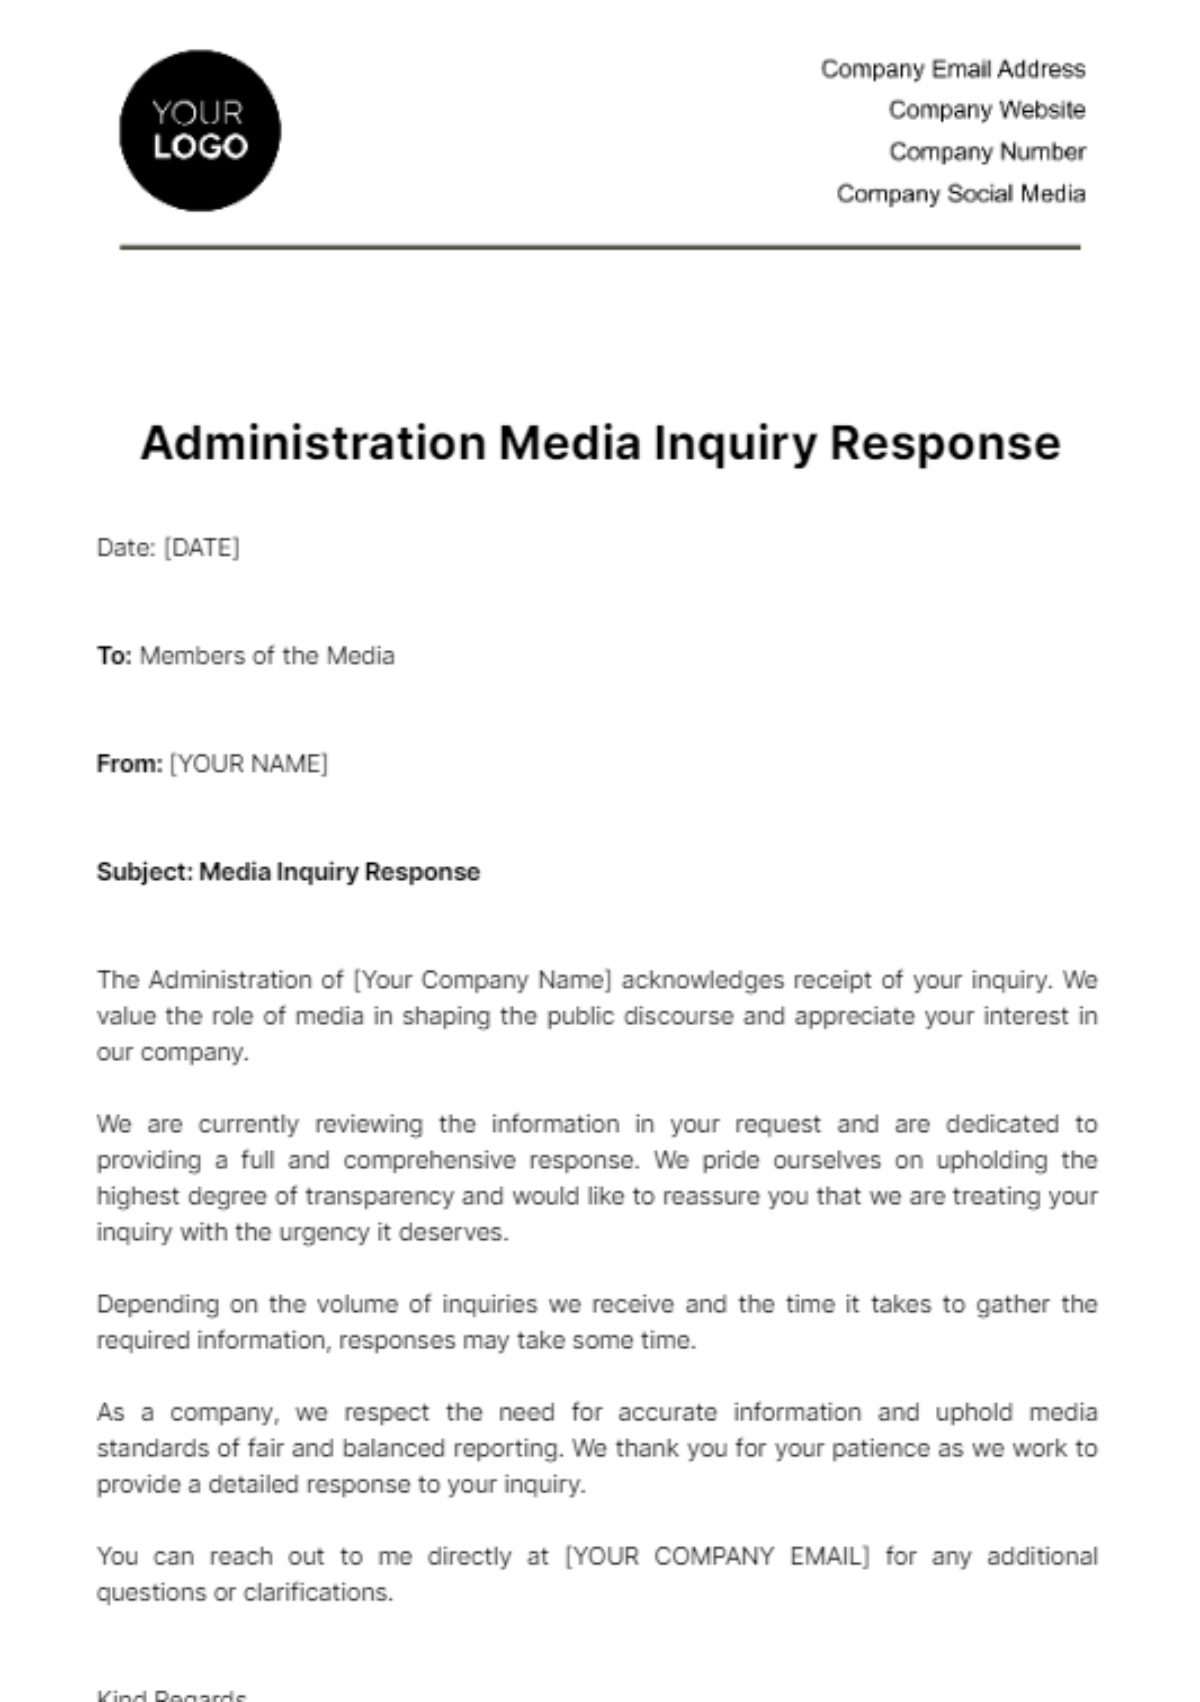 Administration Media Inquiry Response Template